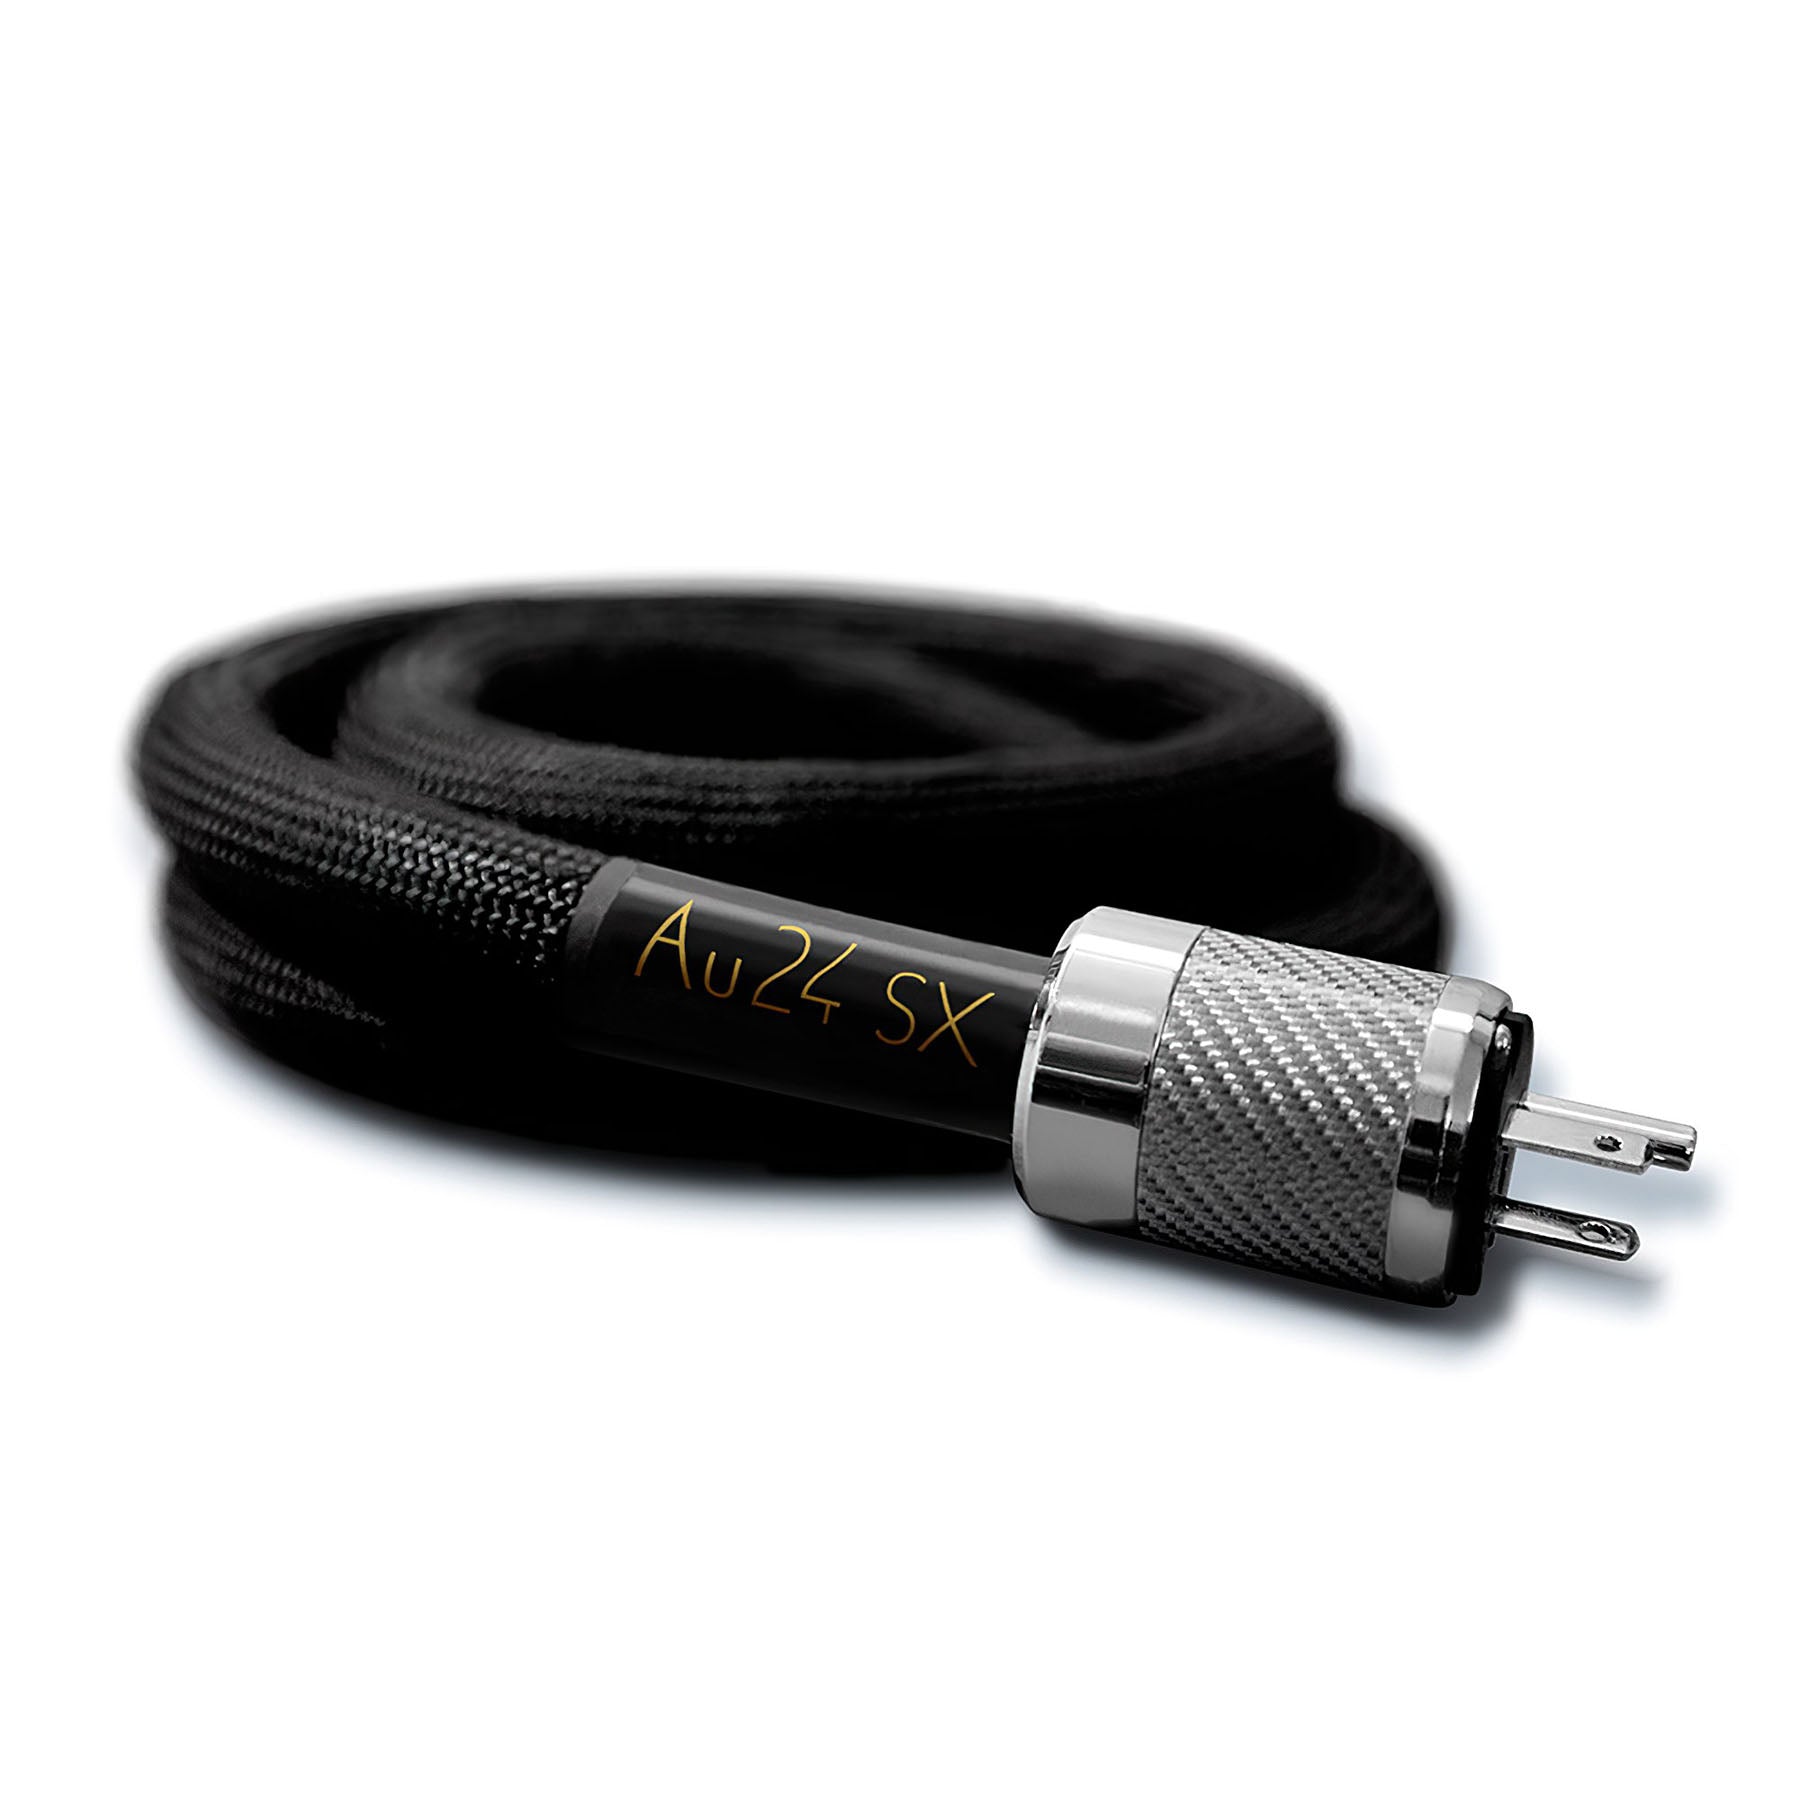 Audience Au24 SX MP 14 AWG AUS-IEC PowerChord Reference Power Cable